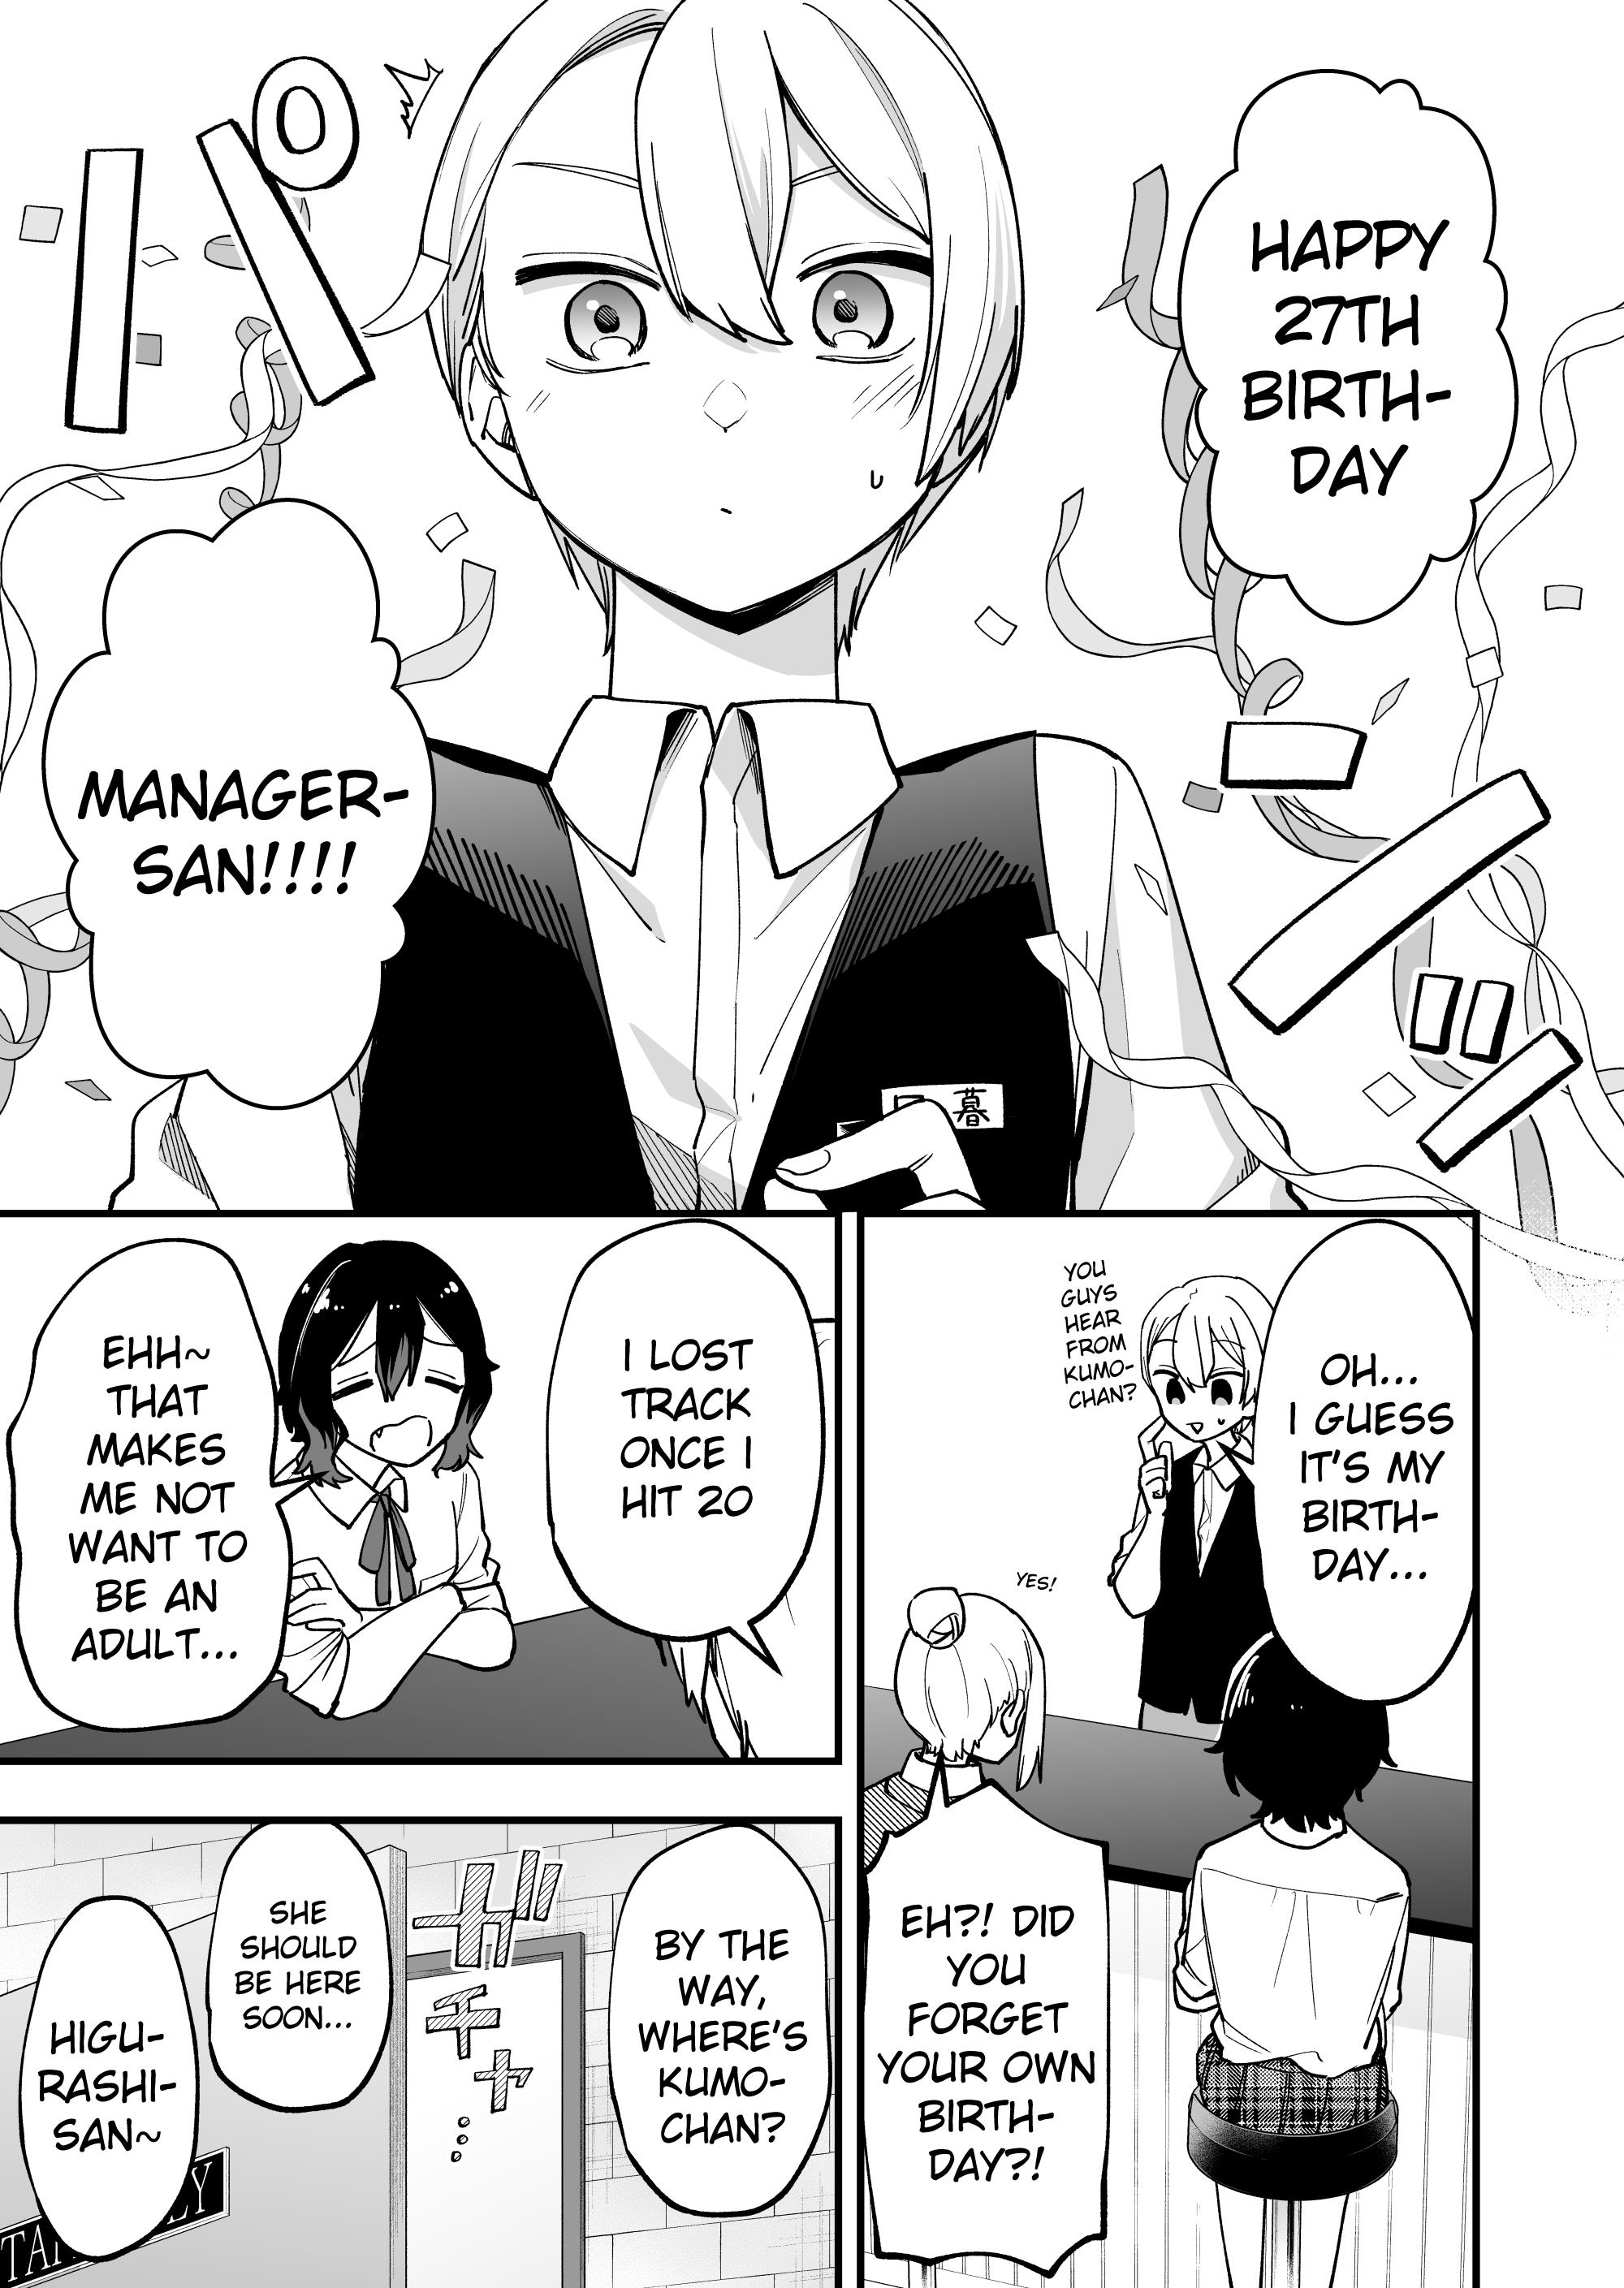 The Manager And The Oblivious Waitress - Page 1